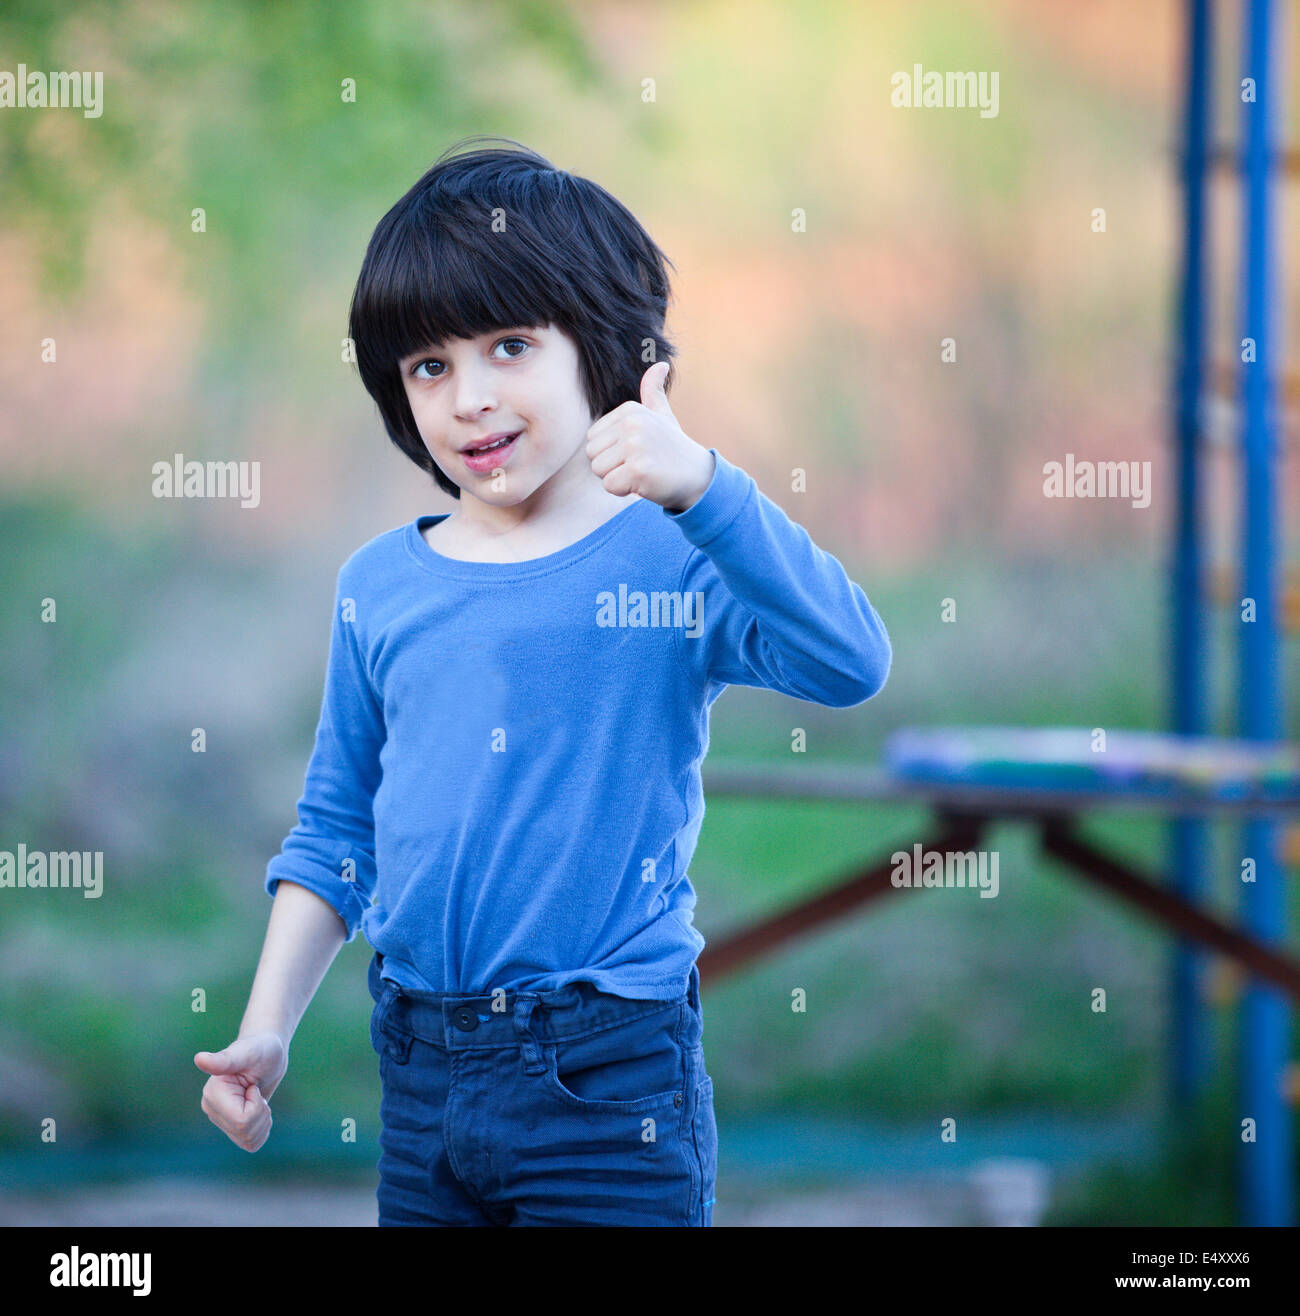 smiling black-haired boy Stock Photo